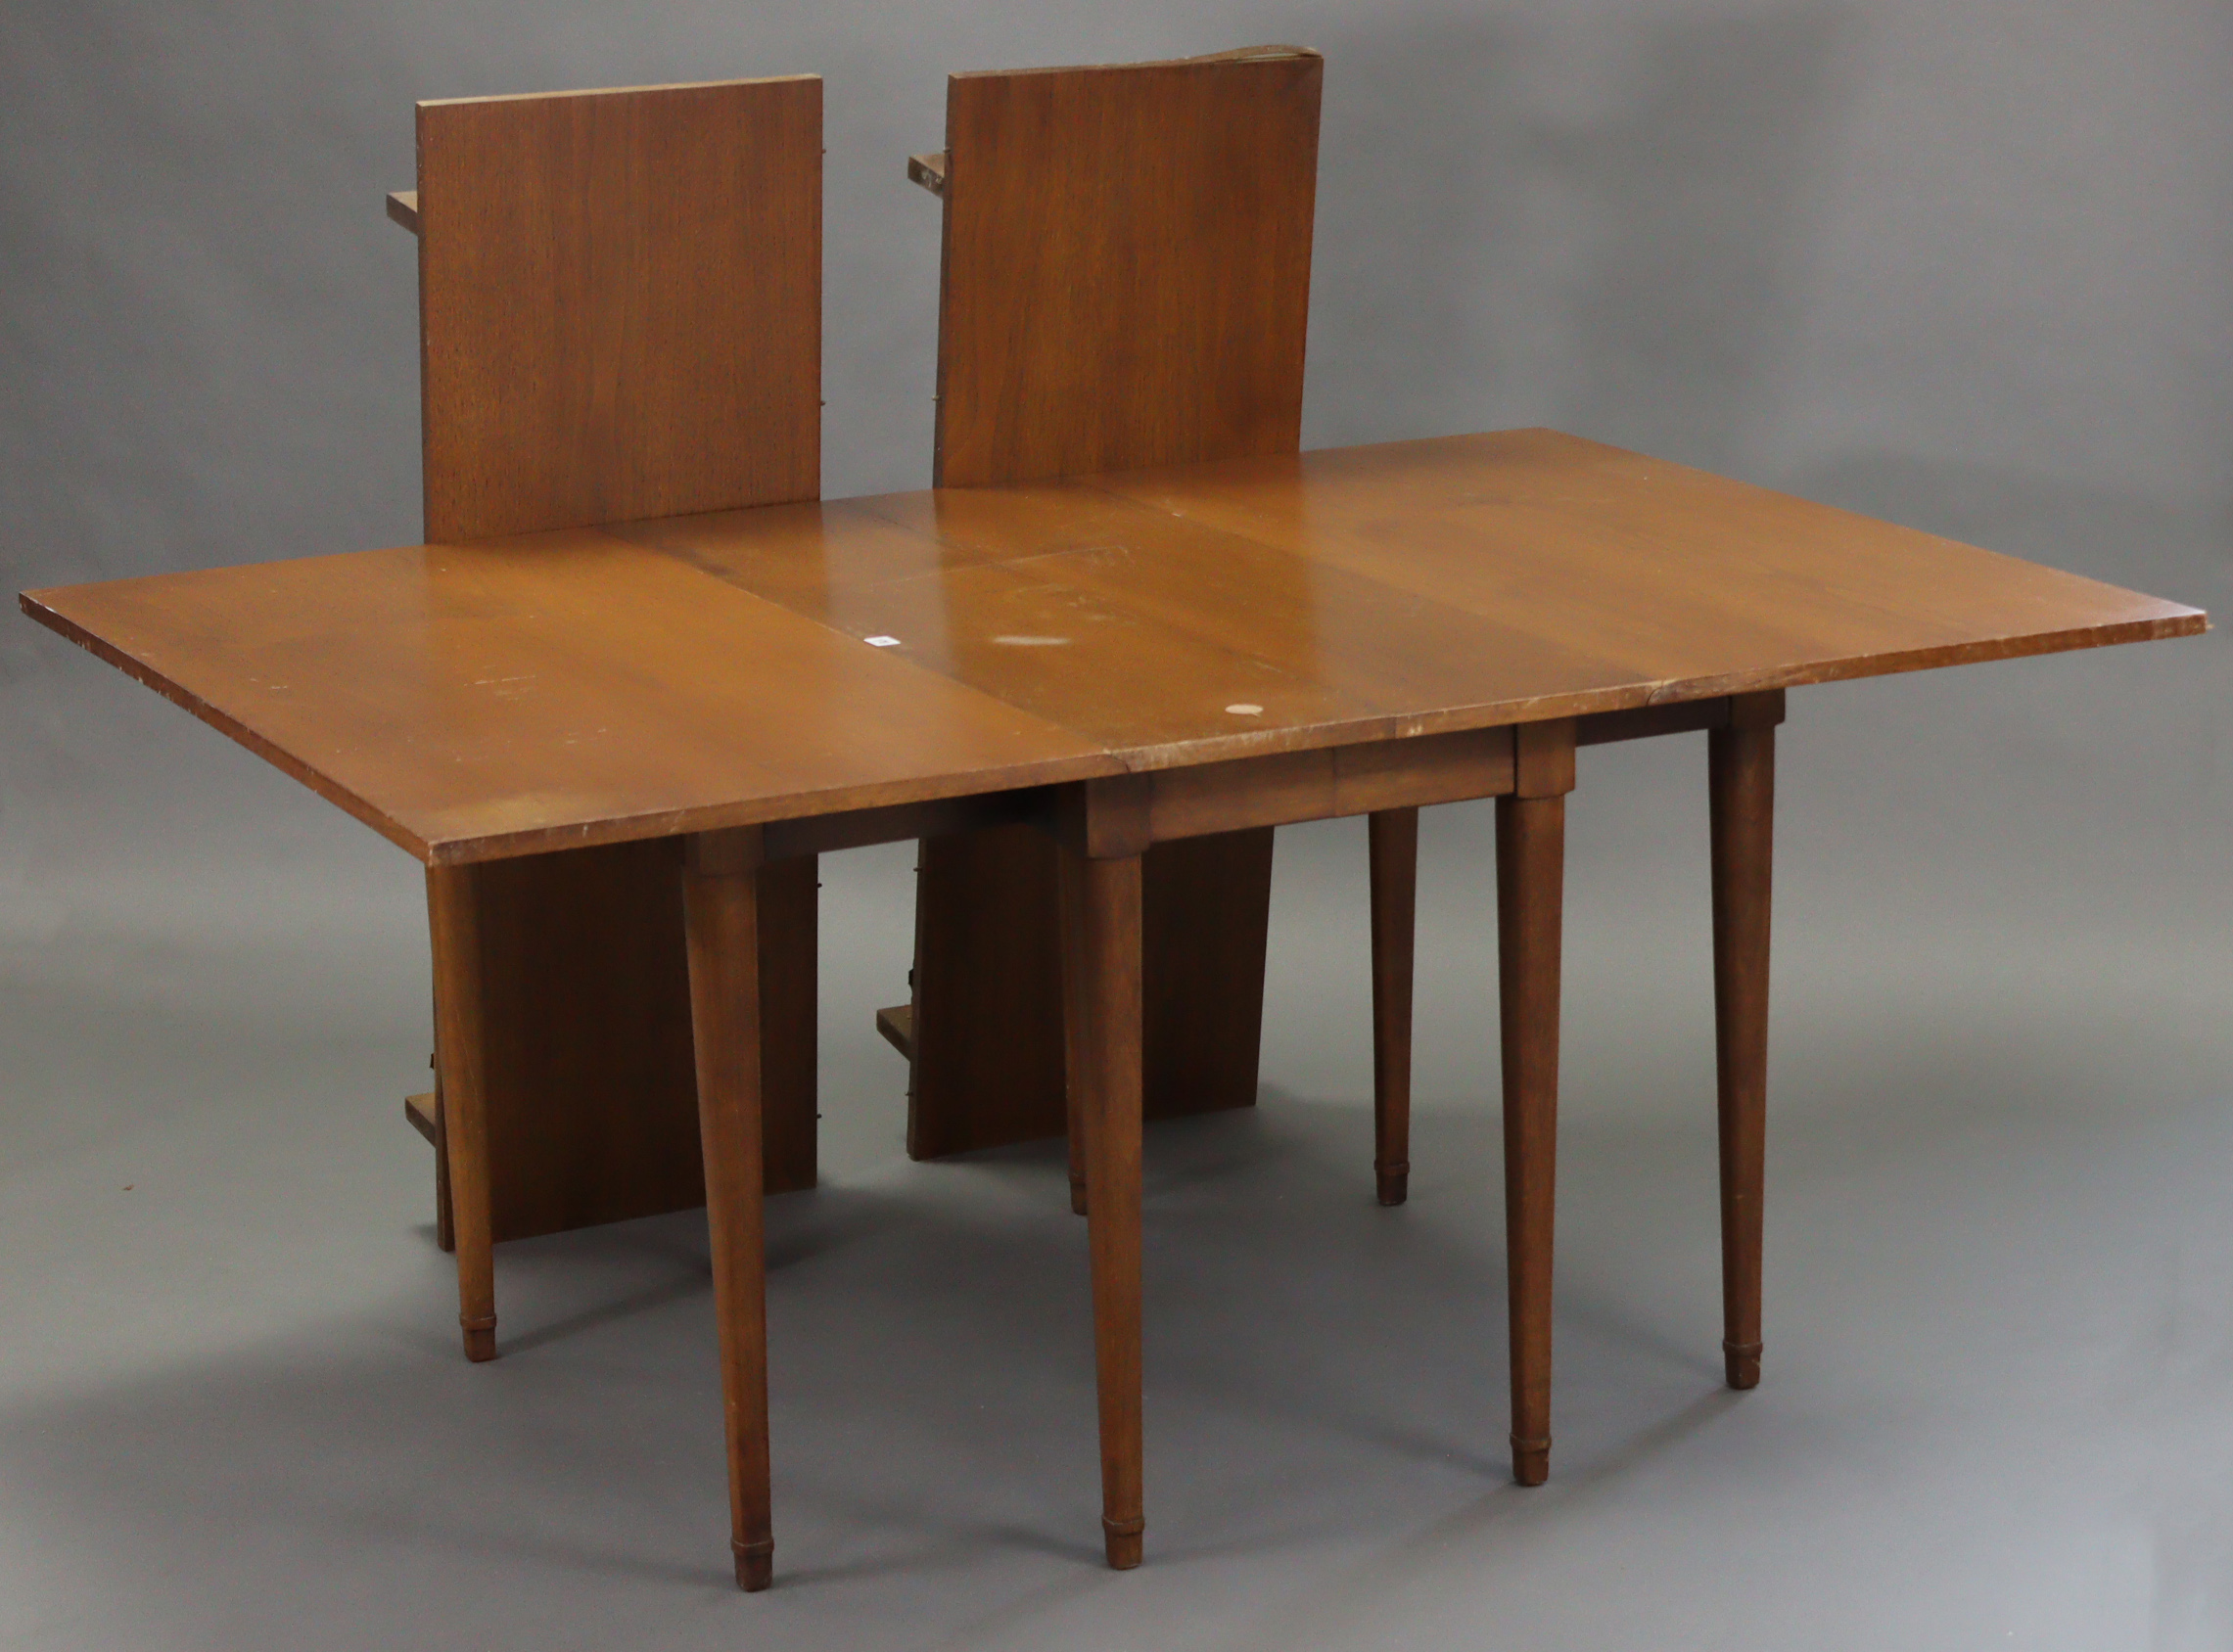 A hardwood drop-leaf dining table (with two additional leaves) on six square tapered legs, 46” x 96”